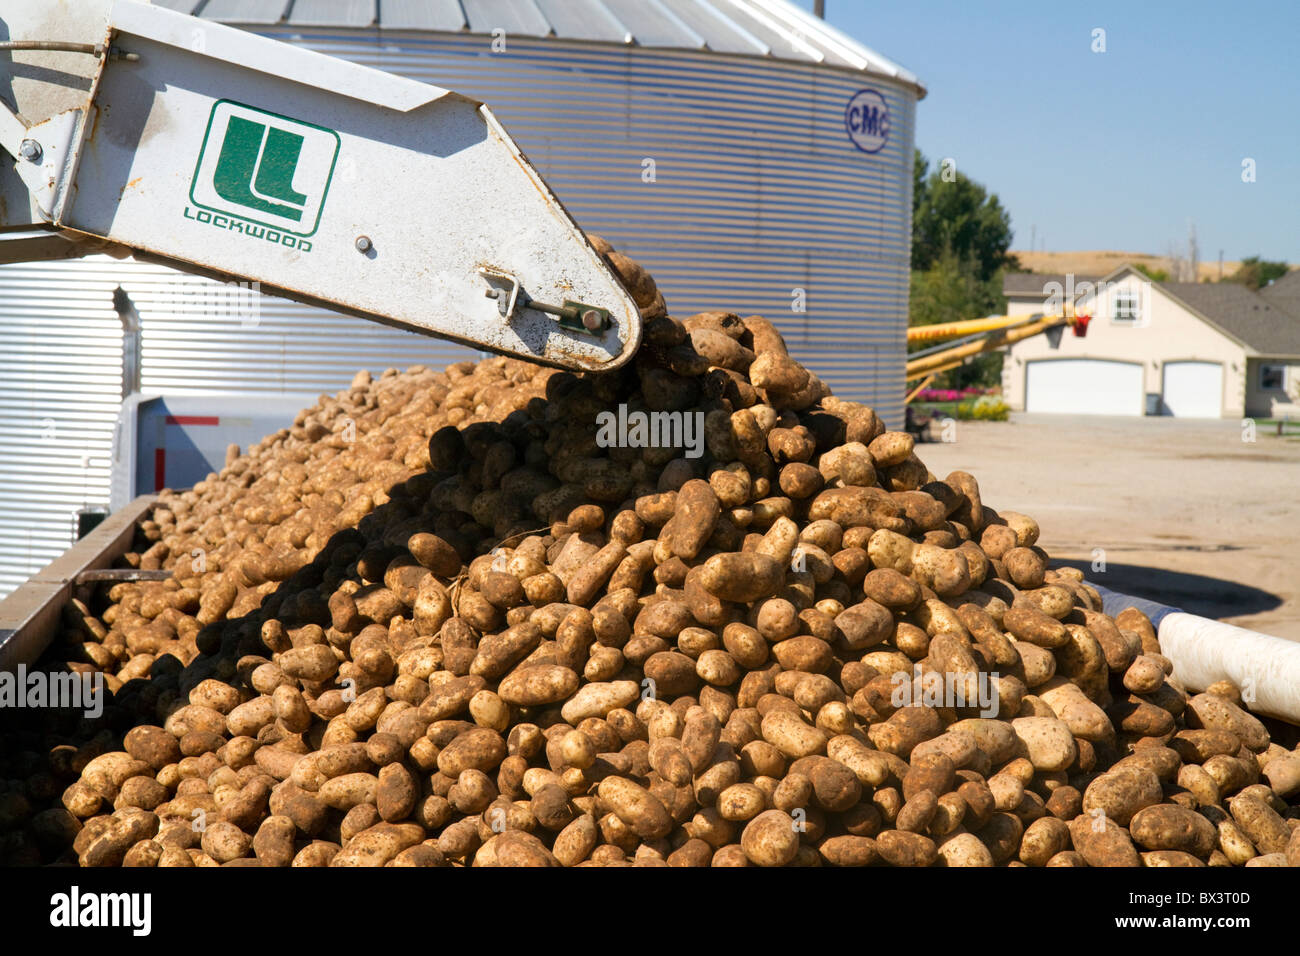 Newly harvested russet potatoes being loaded onto a truck for transport in Canyon County, Idaho, USA. Stock Photo